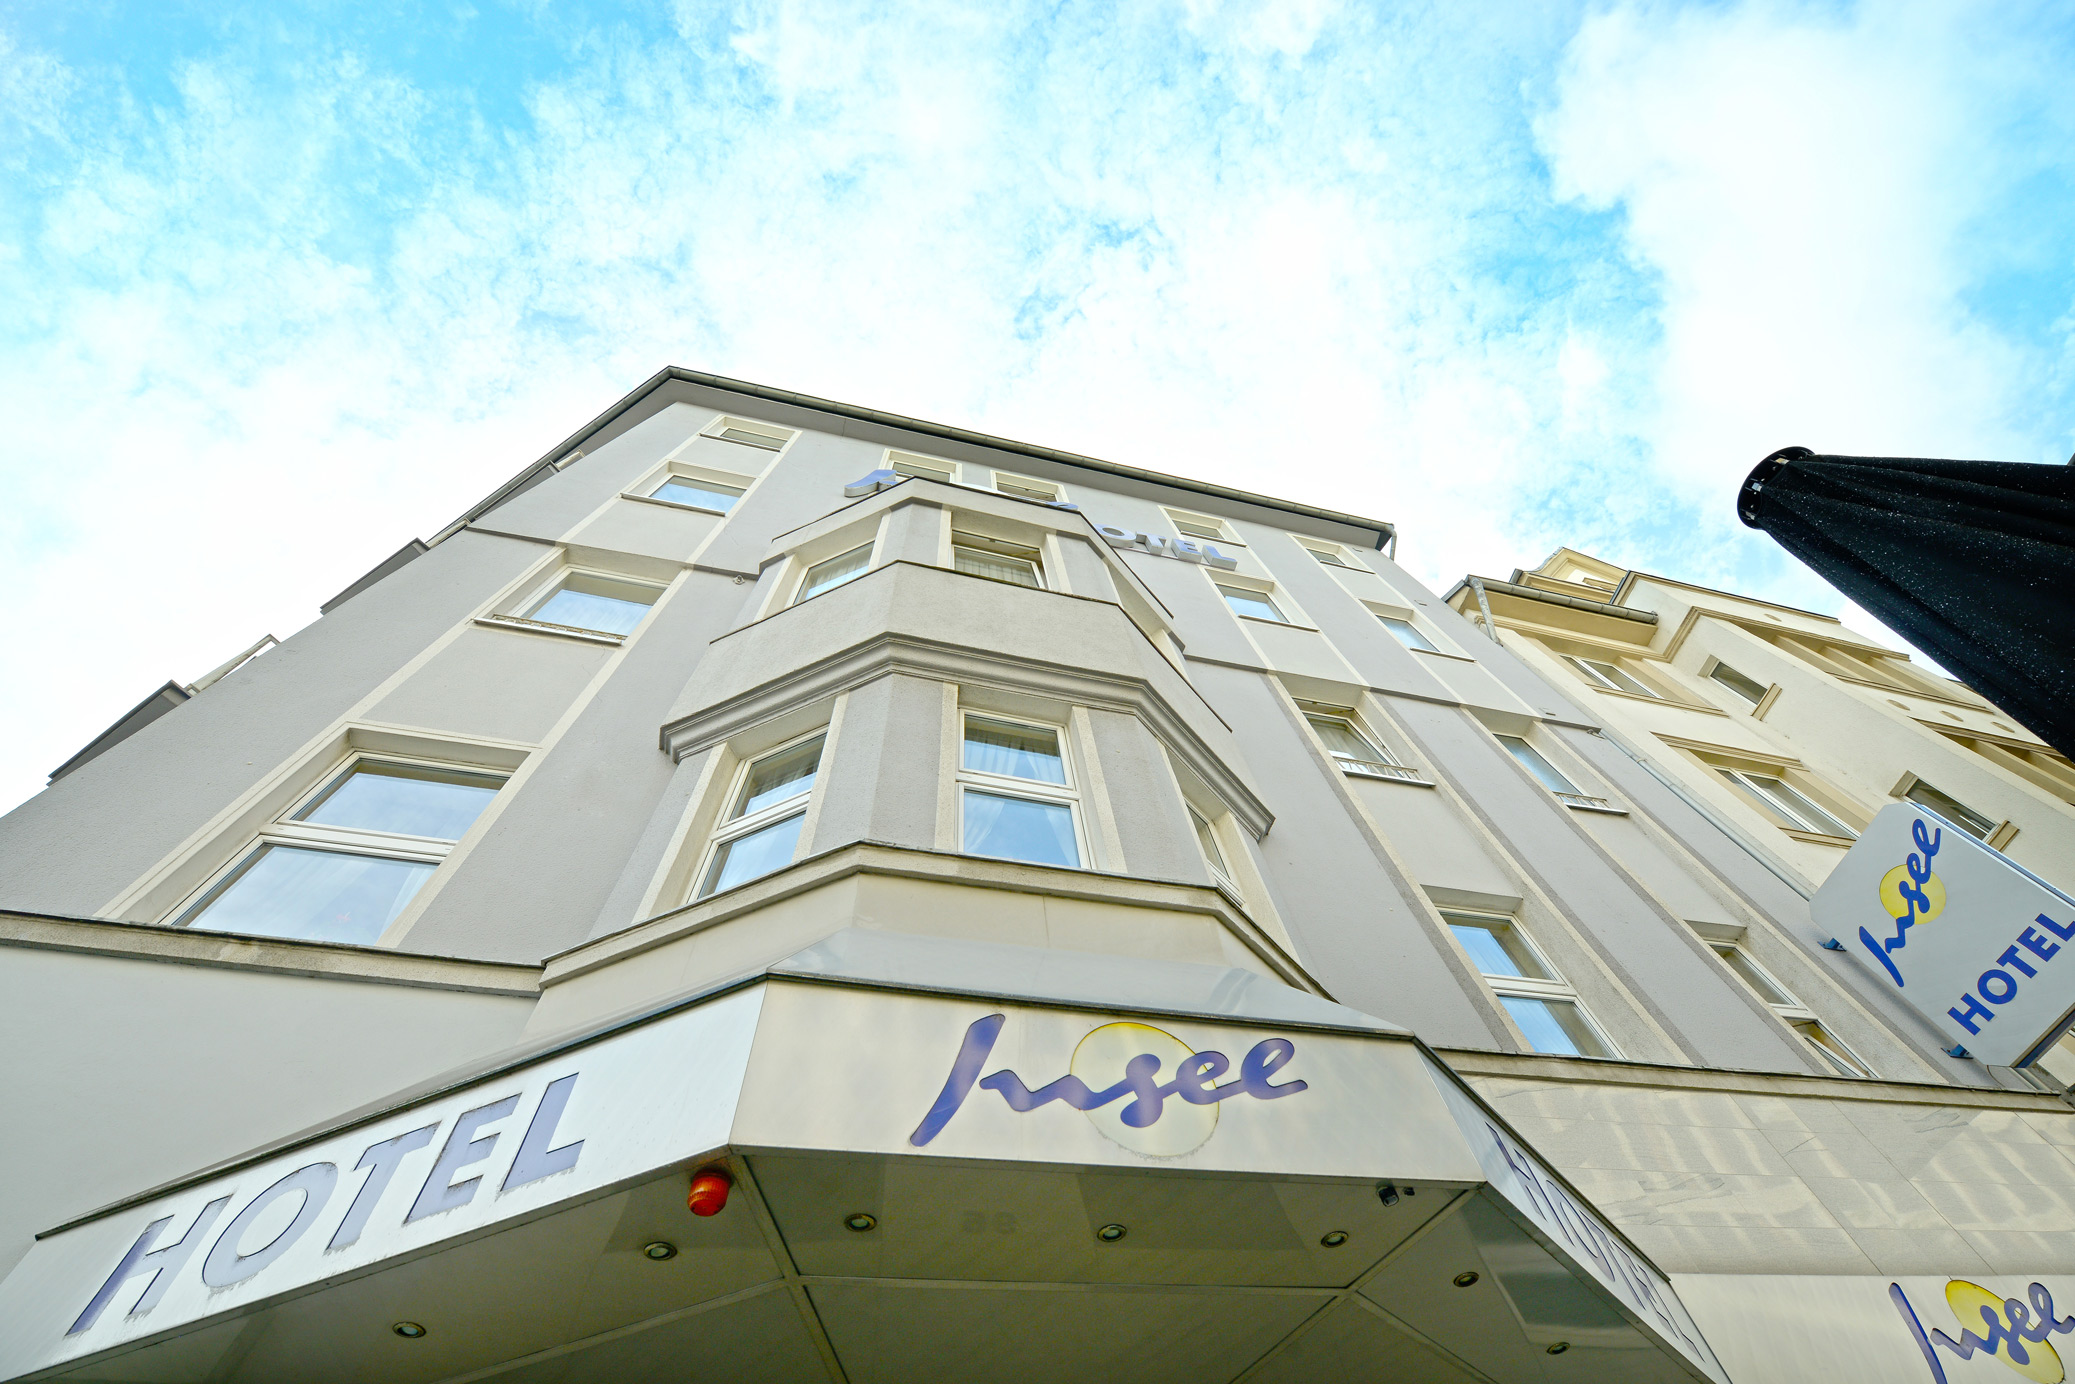 Insel Hotel, we're pleased to have you!